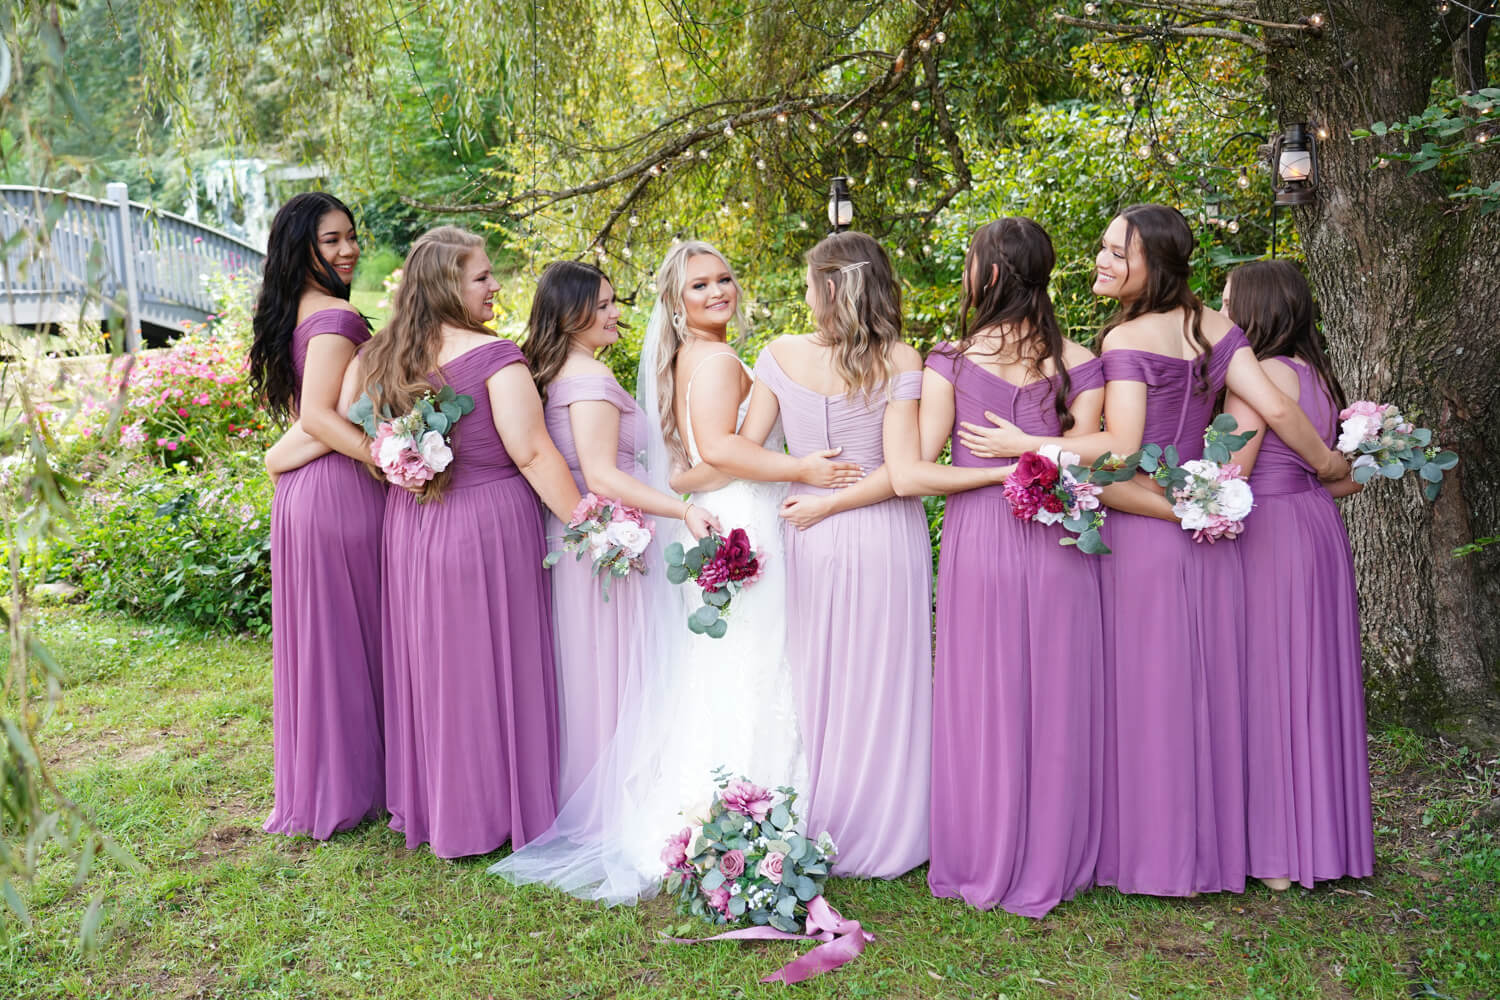 Bridesmaids posing under a willow tree in early fall